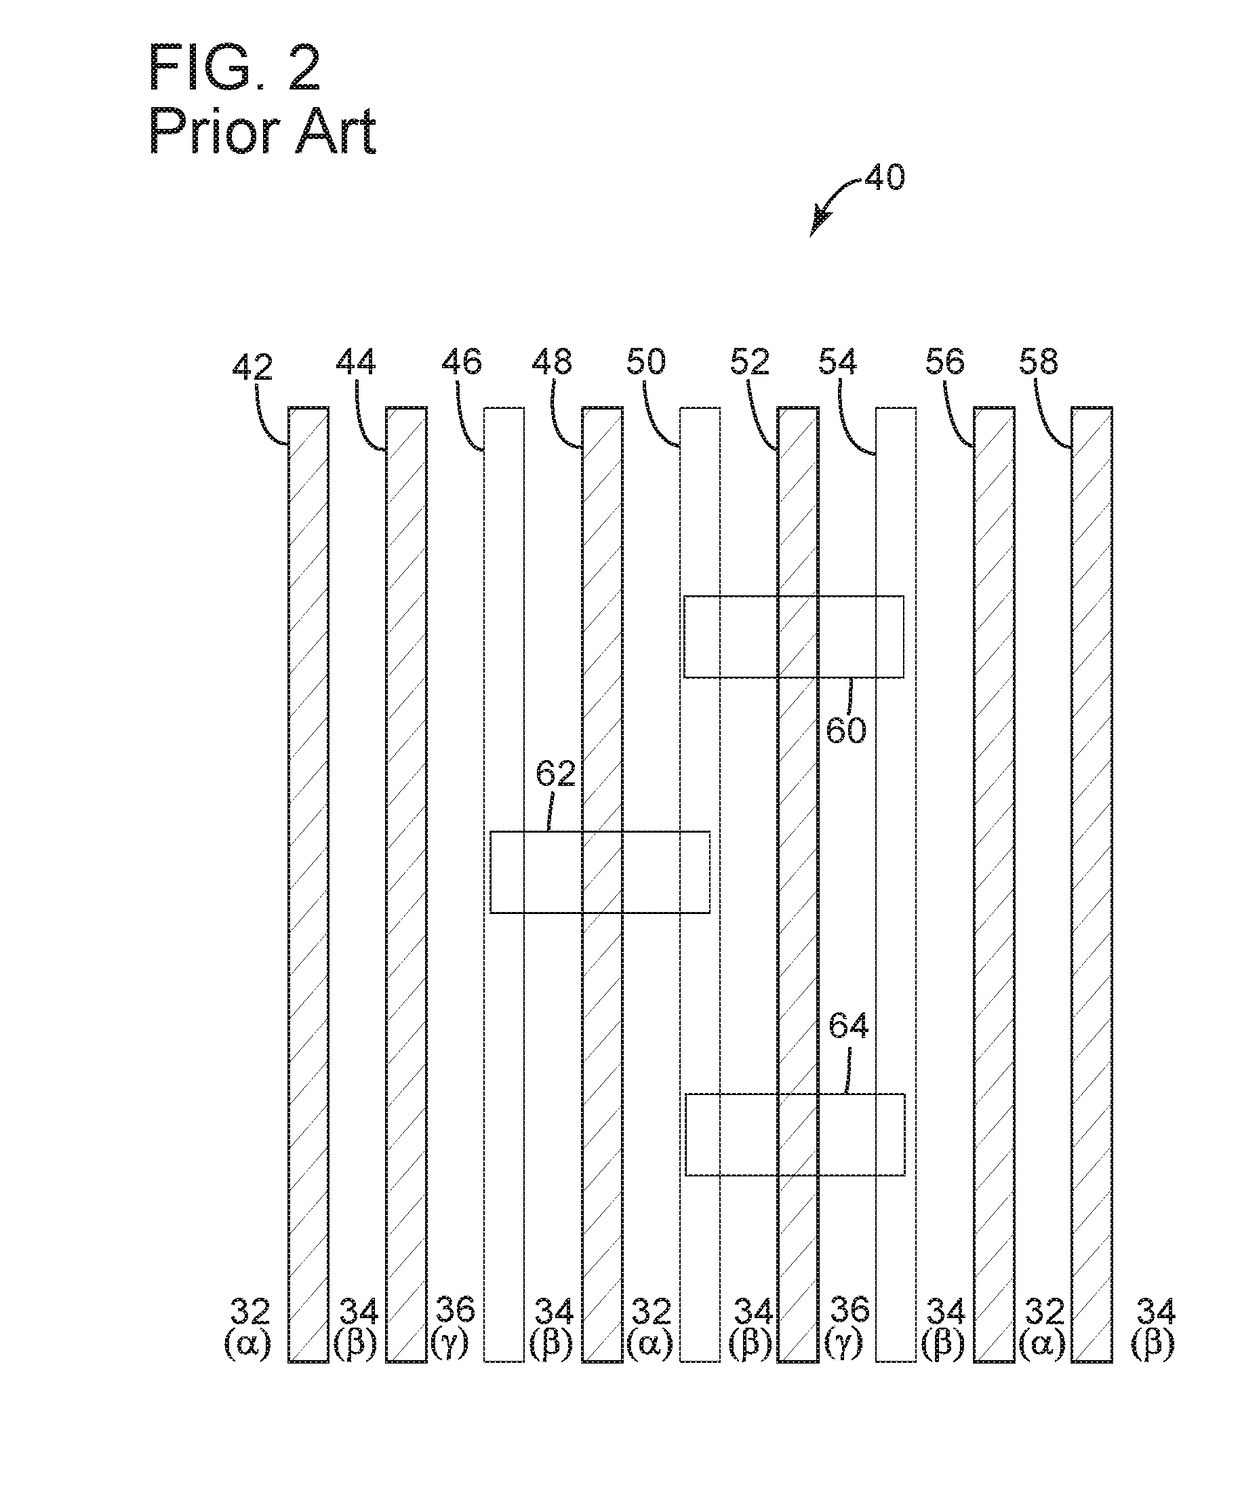 Combined SADP fins for semiconductor devices and methods of making the same